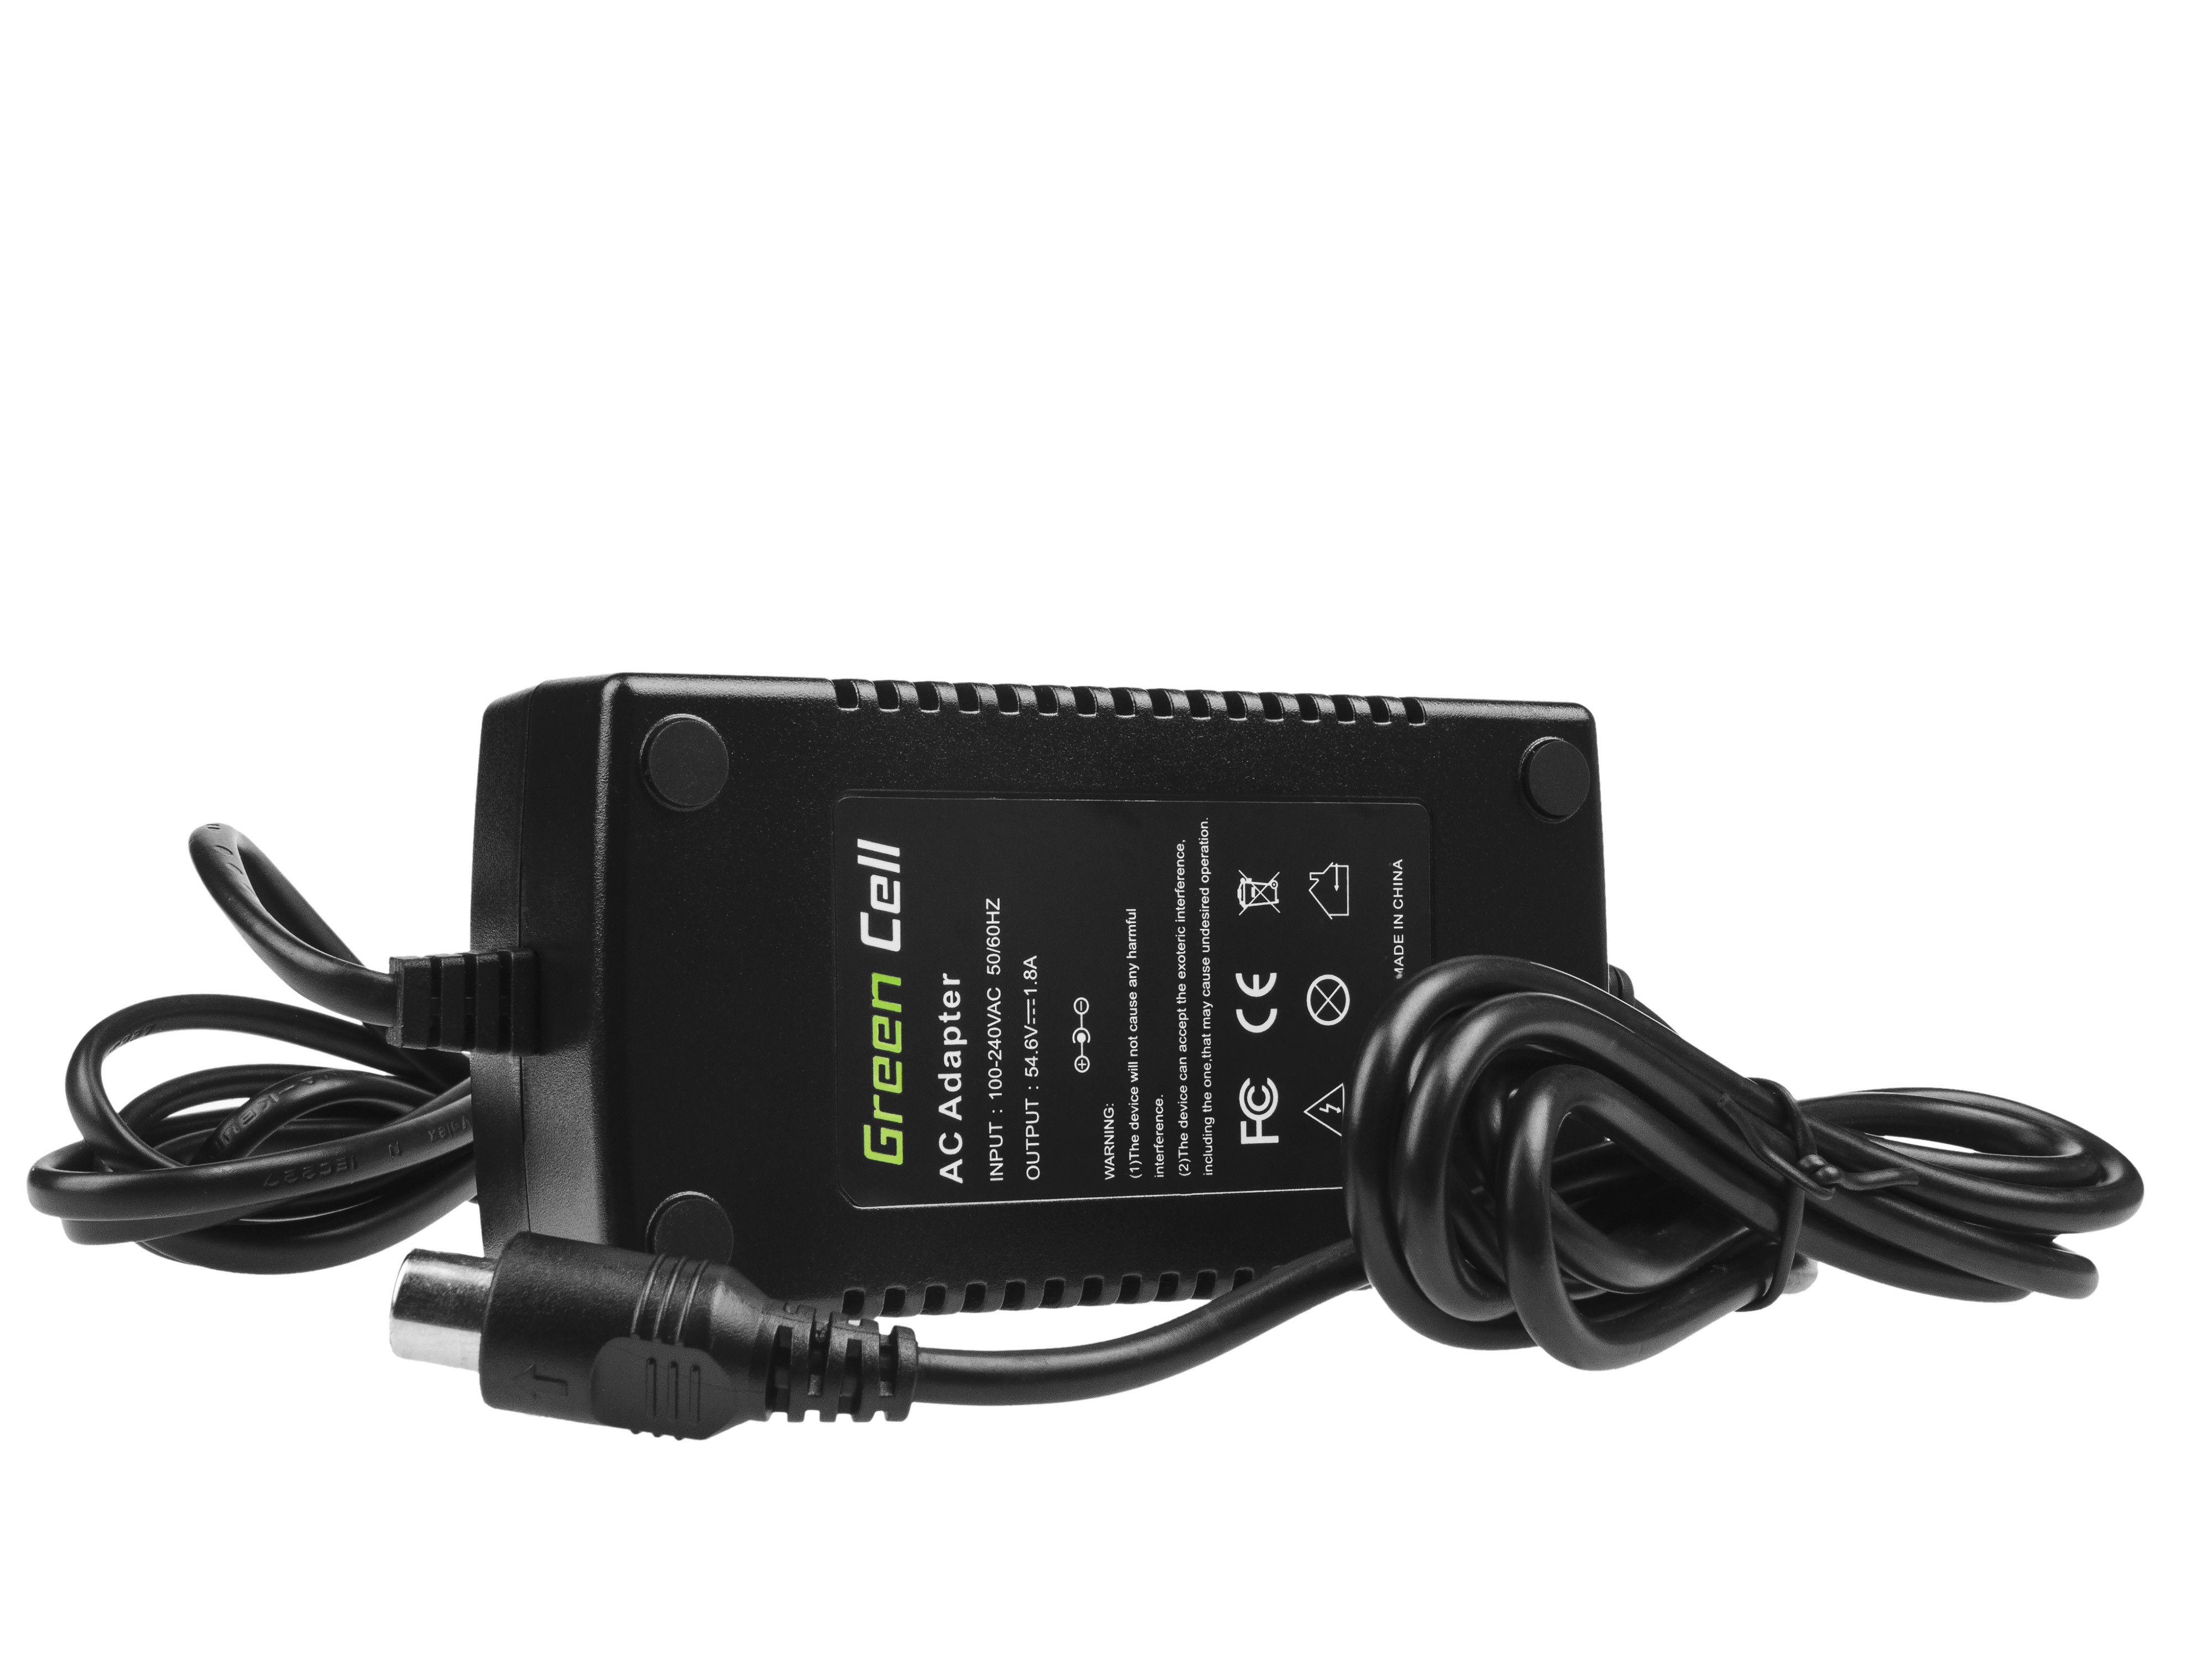 Green Cell Charger 54.6V 1.8A (RCA) for EBIKE batteries 48V